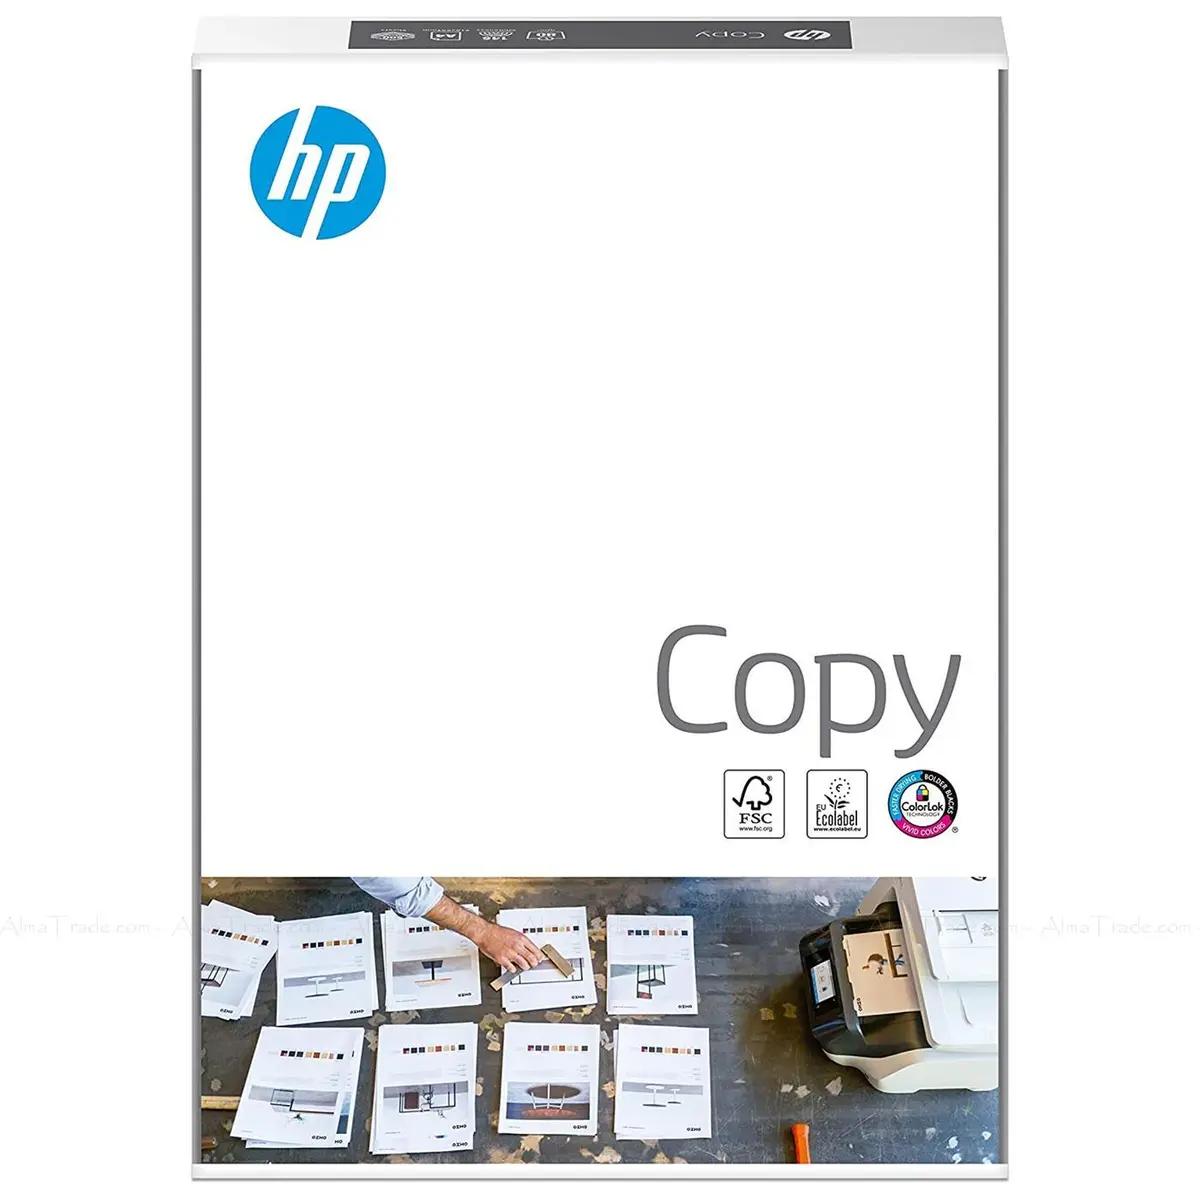 Hp whitepapers: comprehensive guide for technology solutions